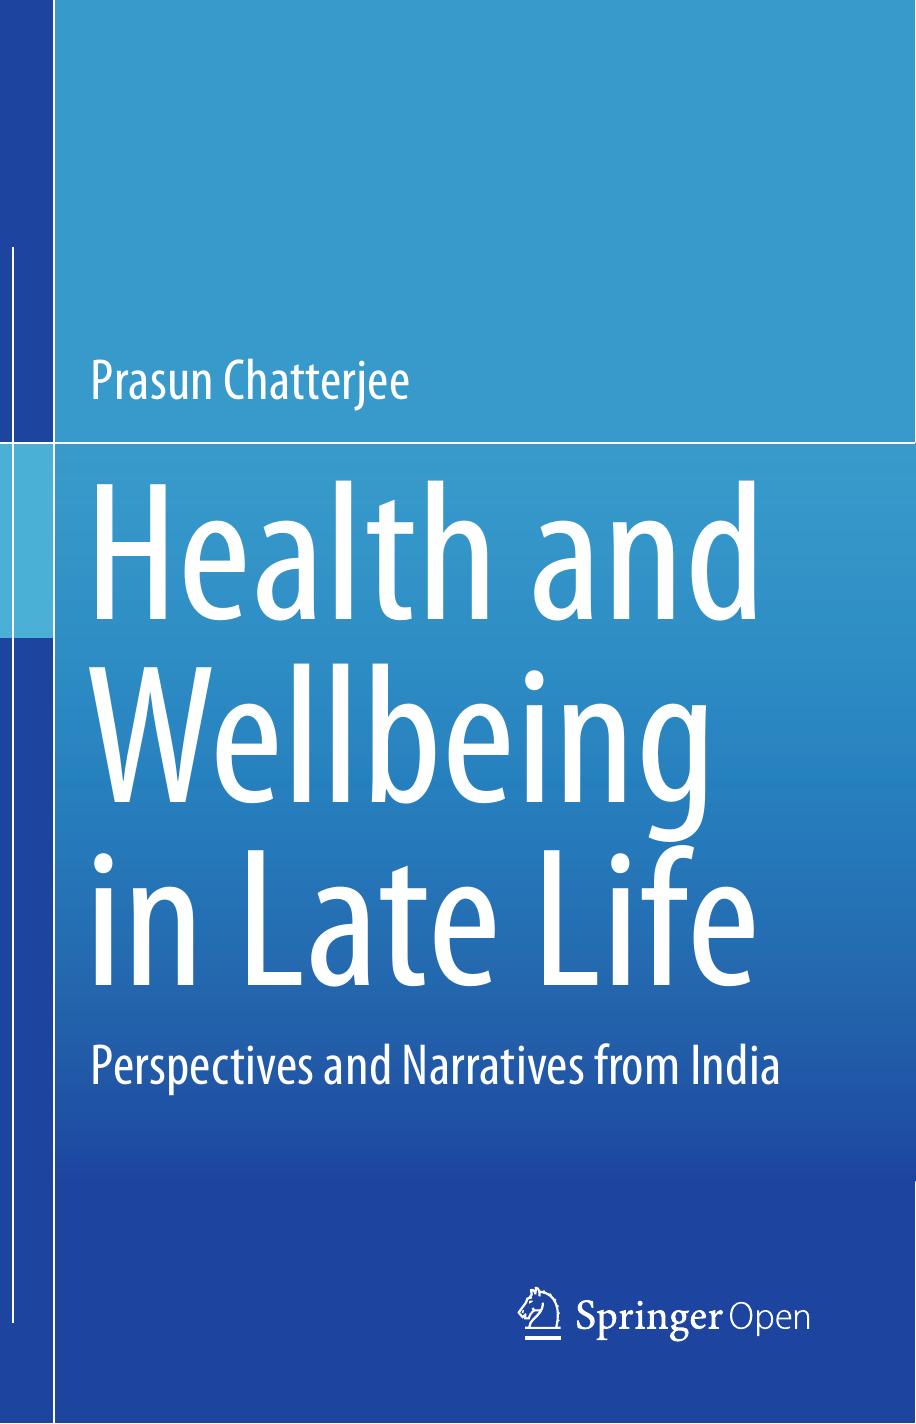 Health and Wellbeing in Late Life by Prasun Chatterjee